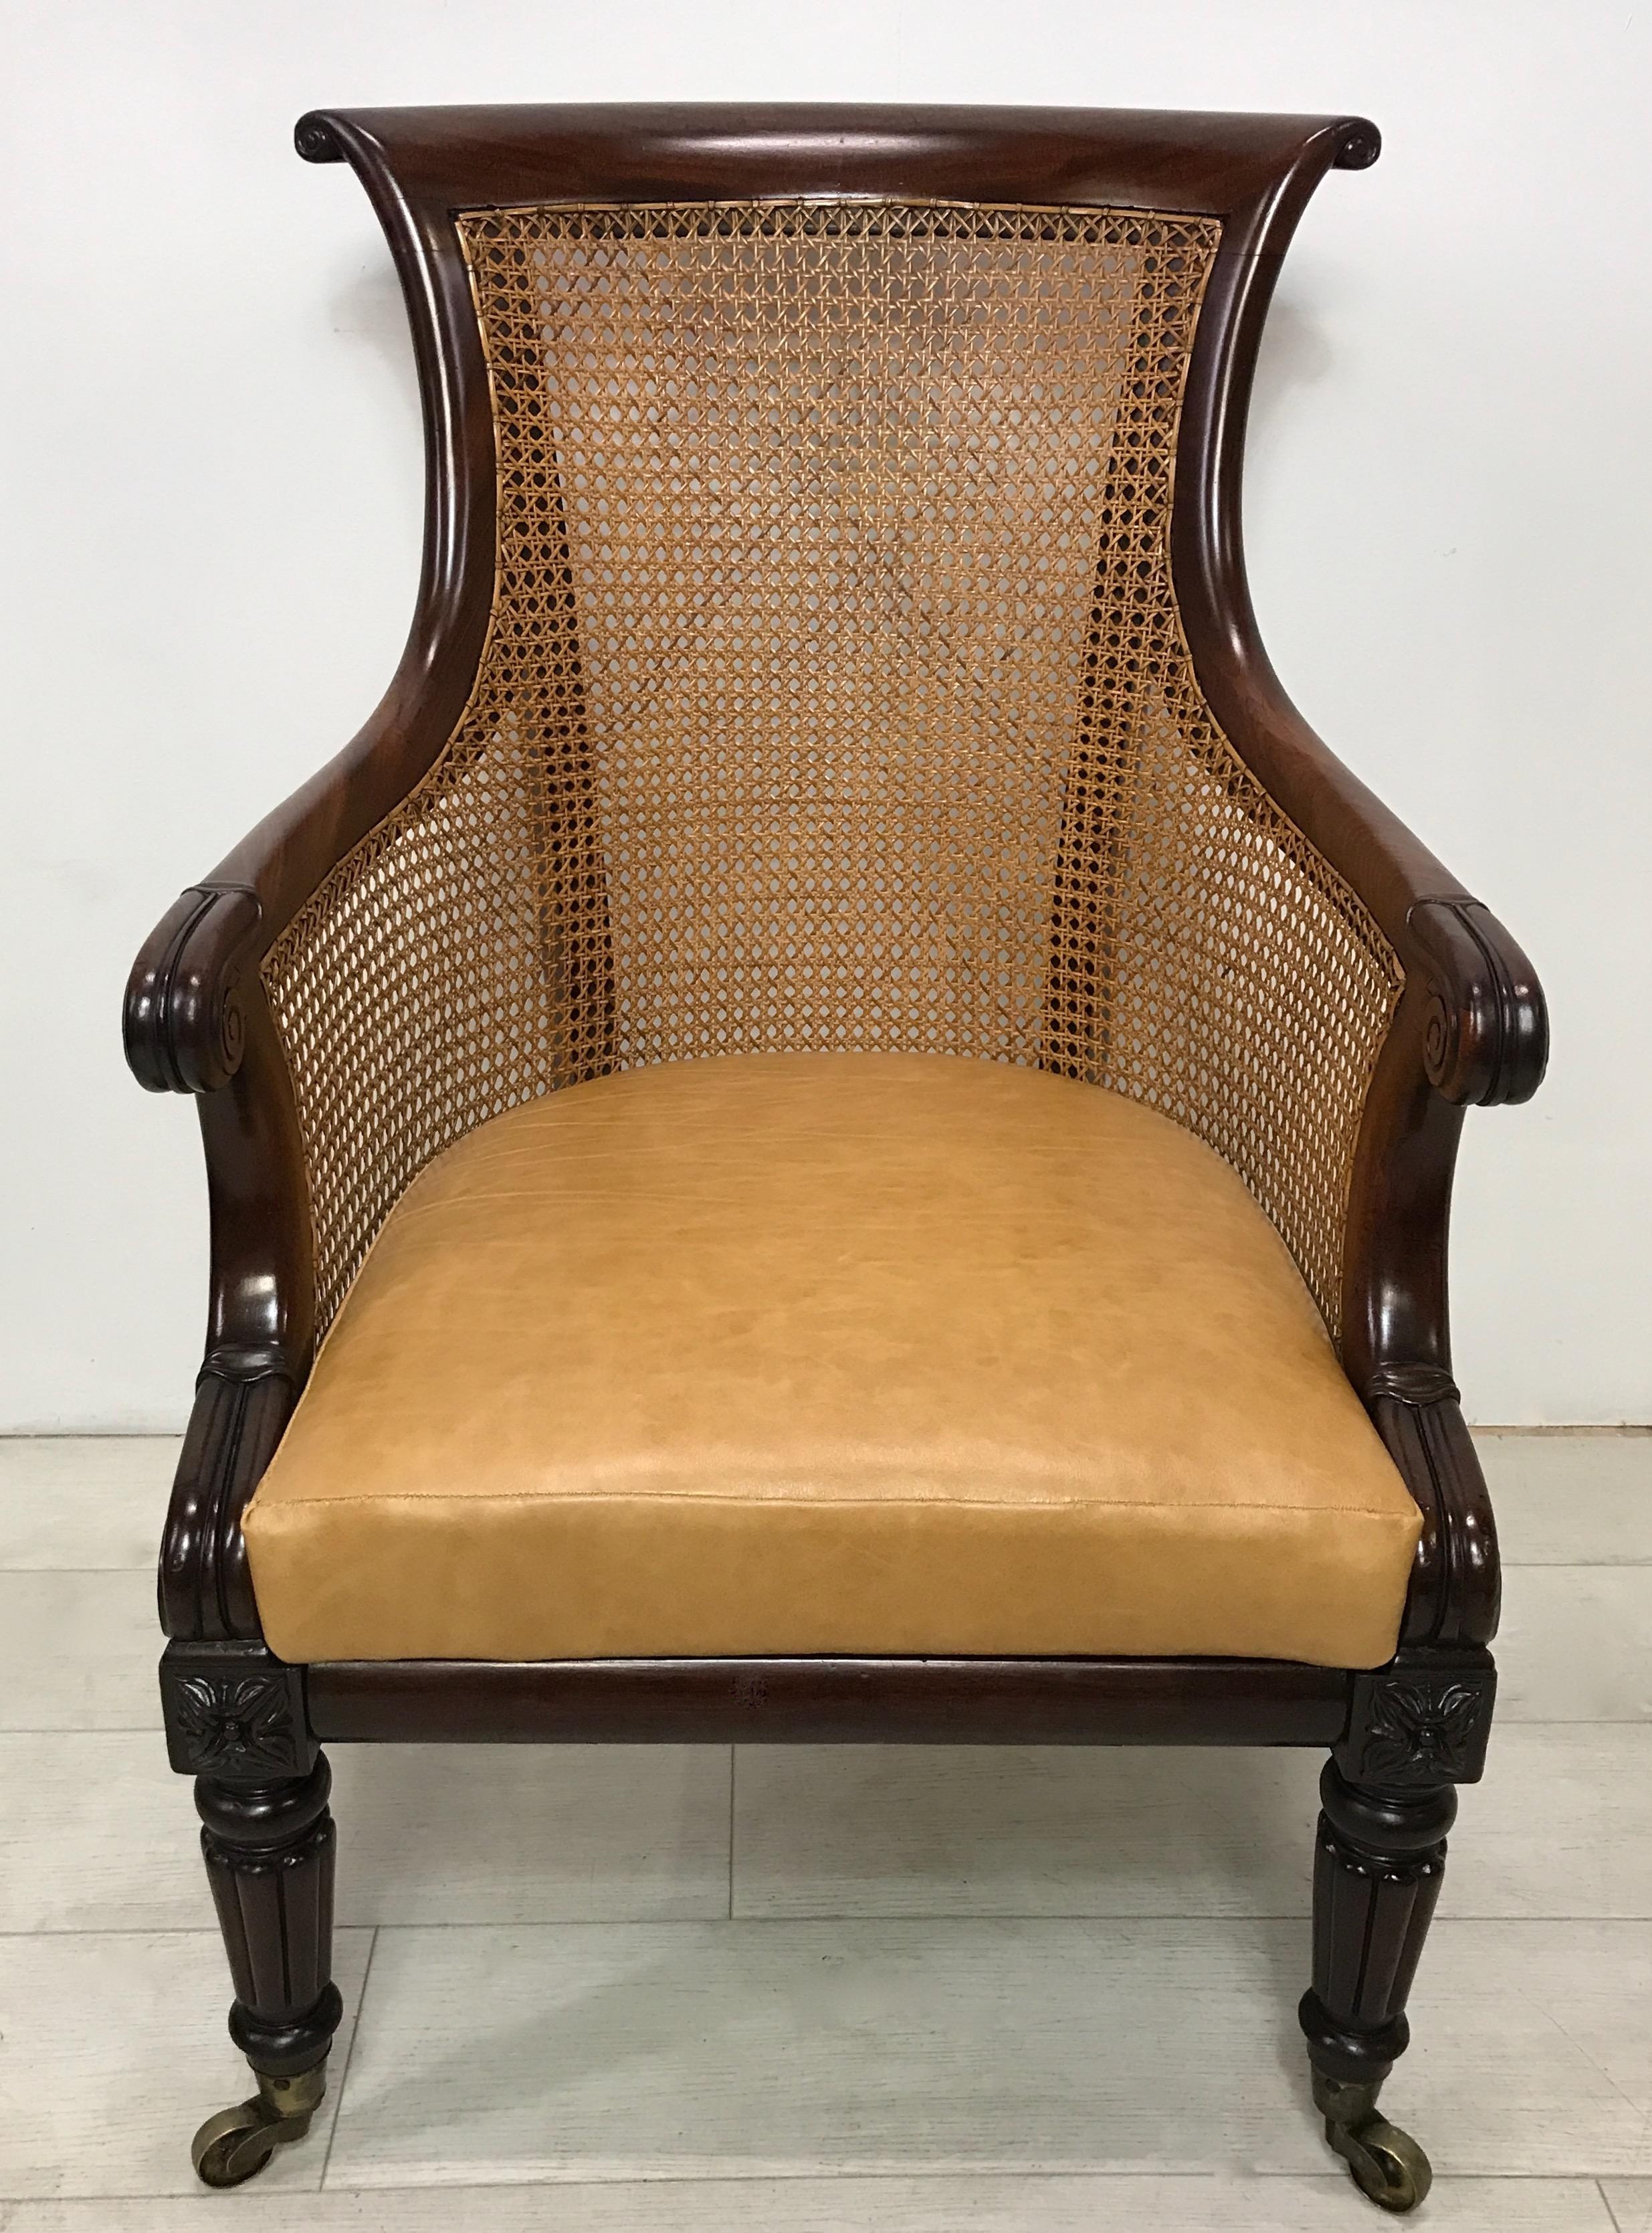 Regency period mahogany and caned filled library chair with removable leather cushion seat. This is a fine example of this style of chair.
In good solid condition, small professional repair to back leg, caning replaced in the second half of the 20th